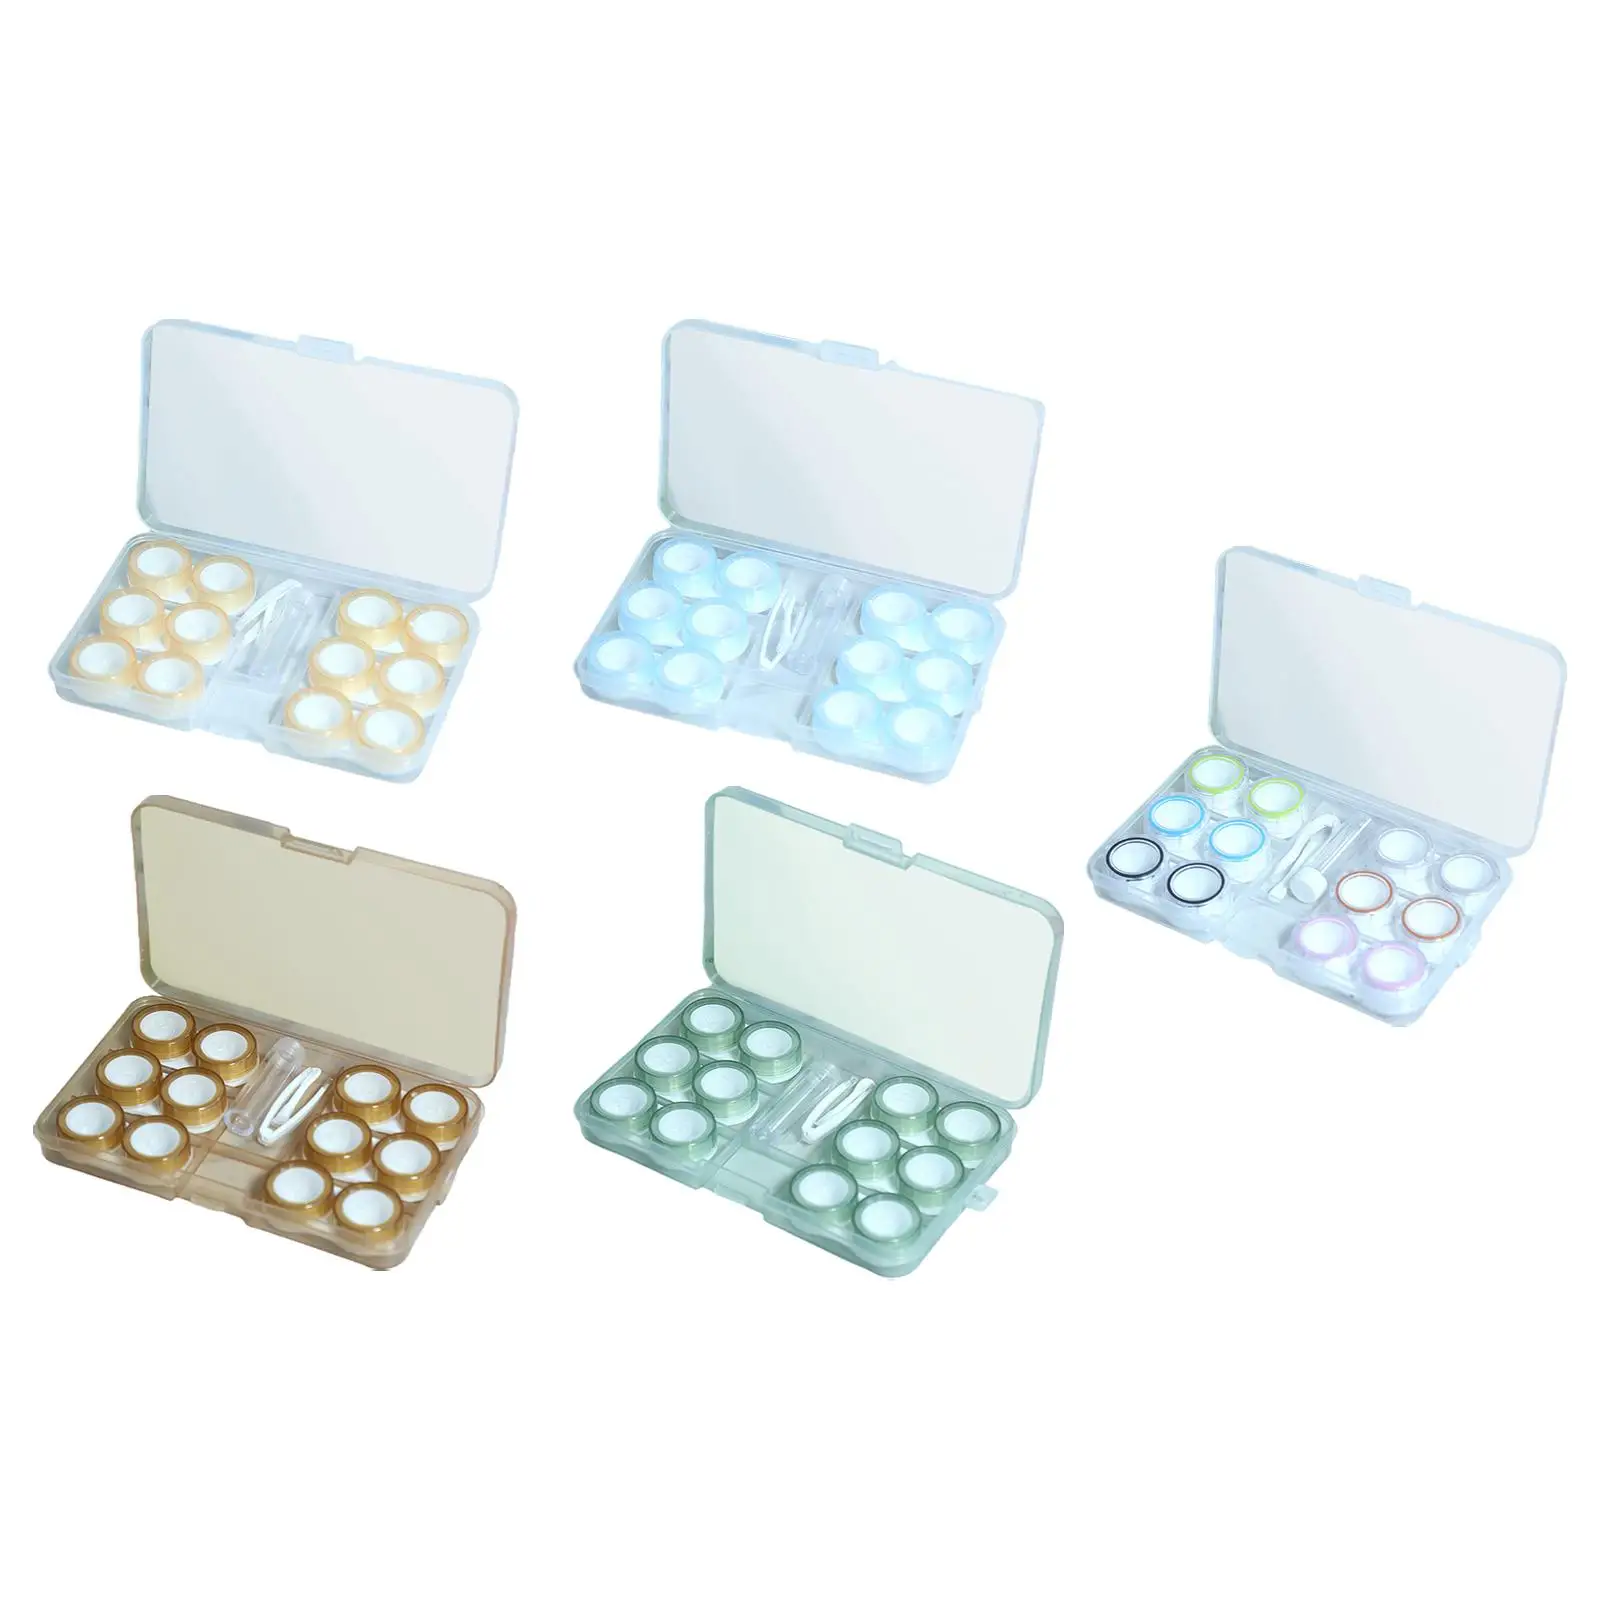 Portable 6 Pairs Contact Lens Case Set Small Size Convenient with Anti Leaking Silicone Seals Durable Sturdy for Women